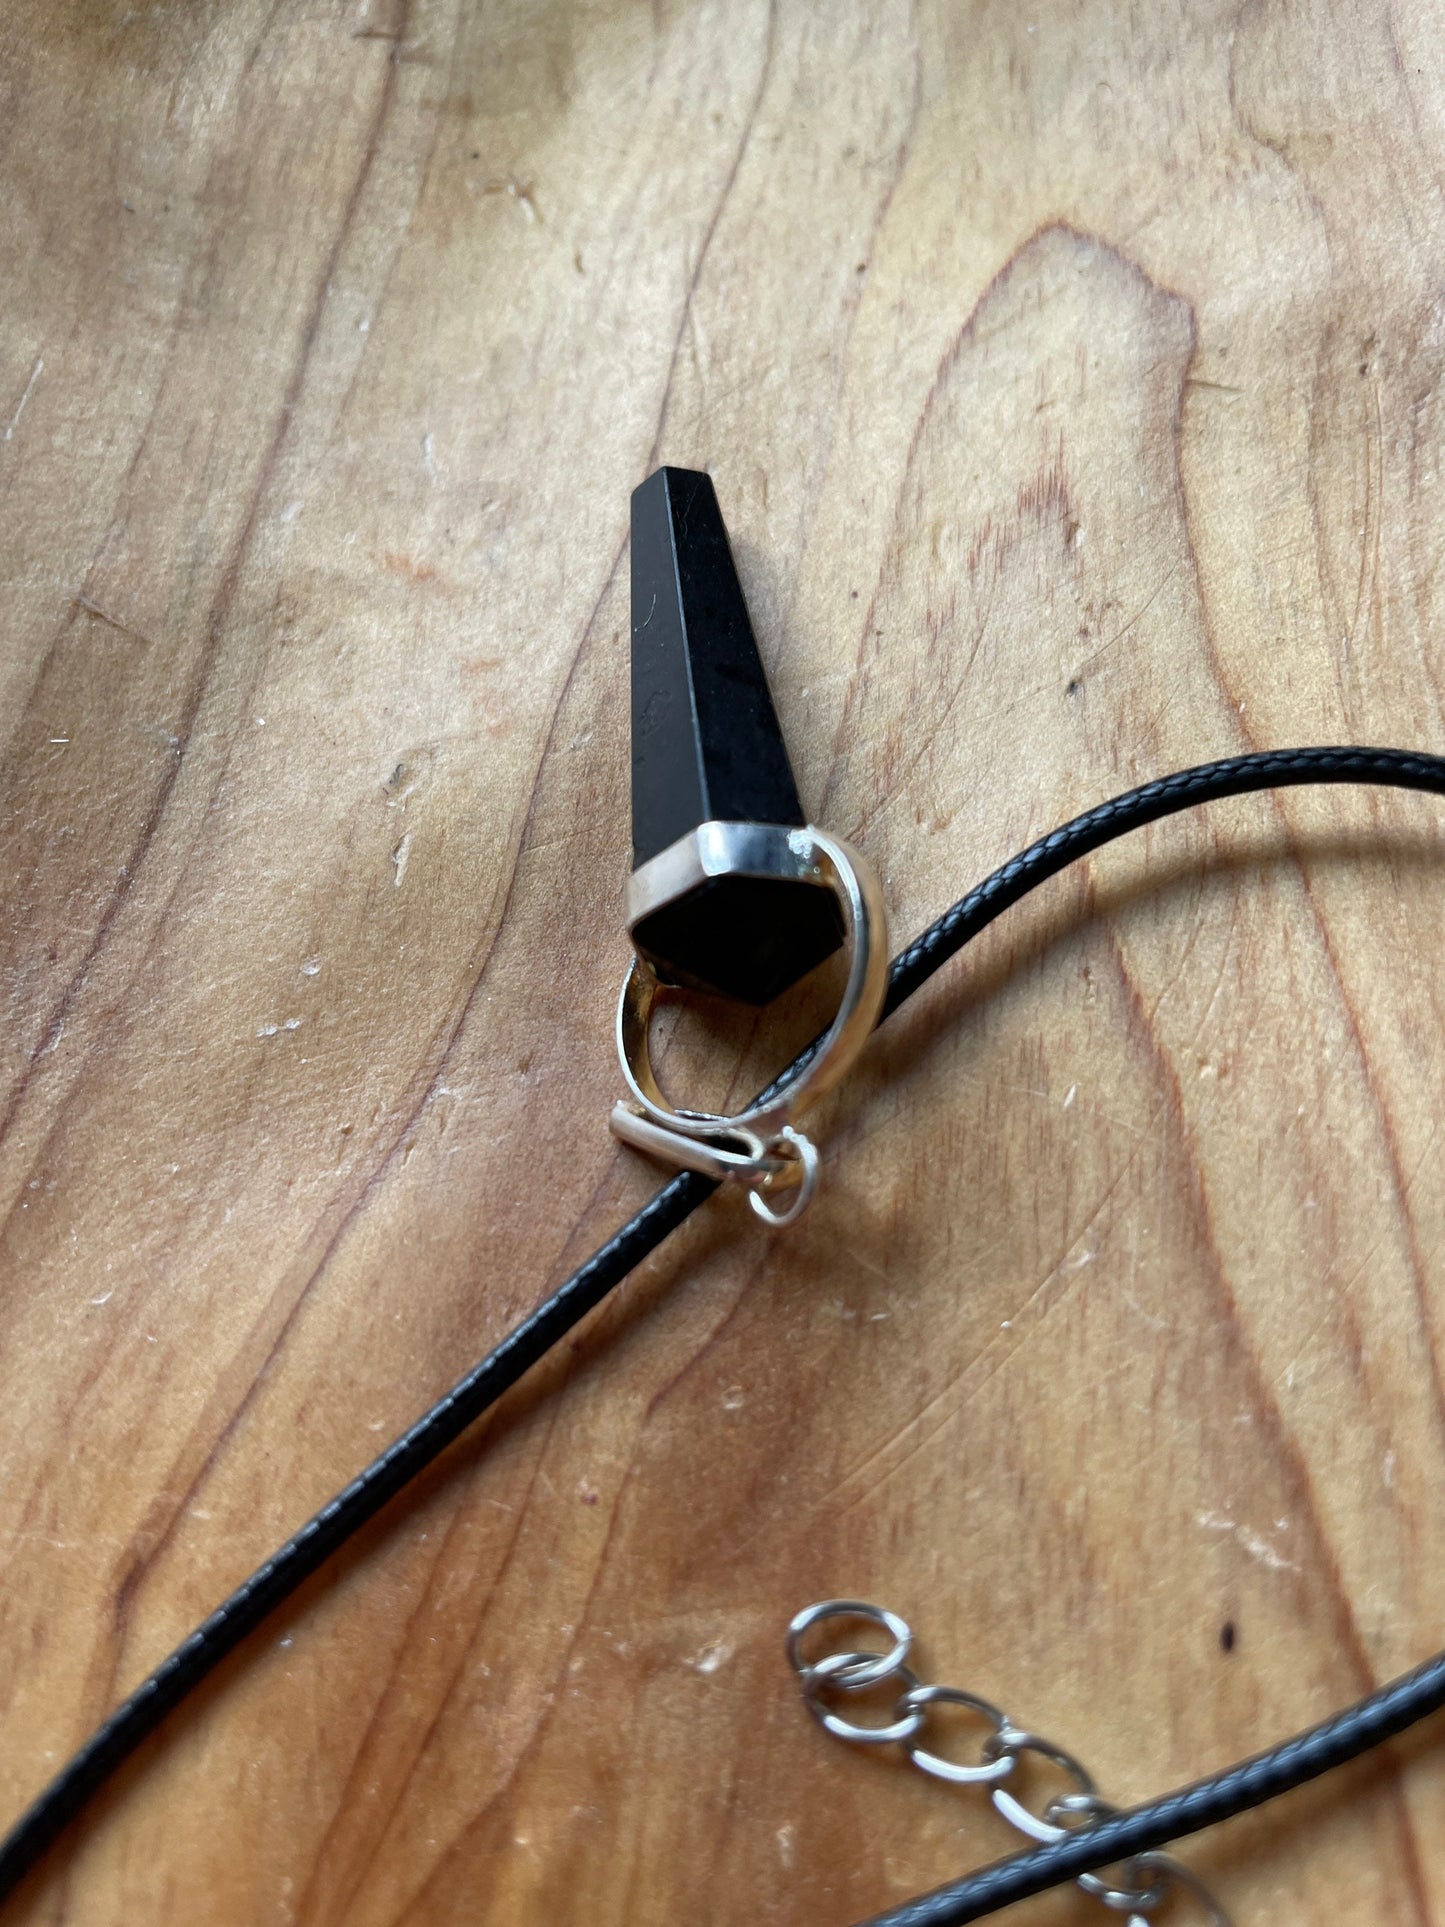 Super sharp looking black obsidian point necklace on black cord